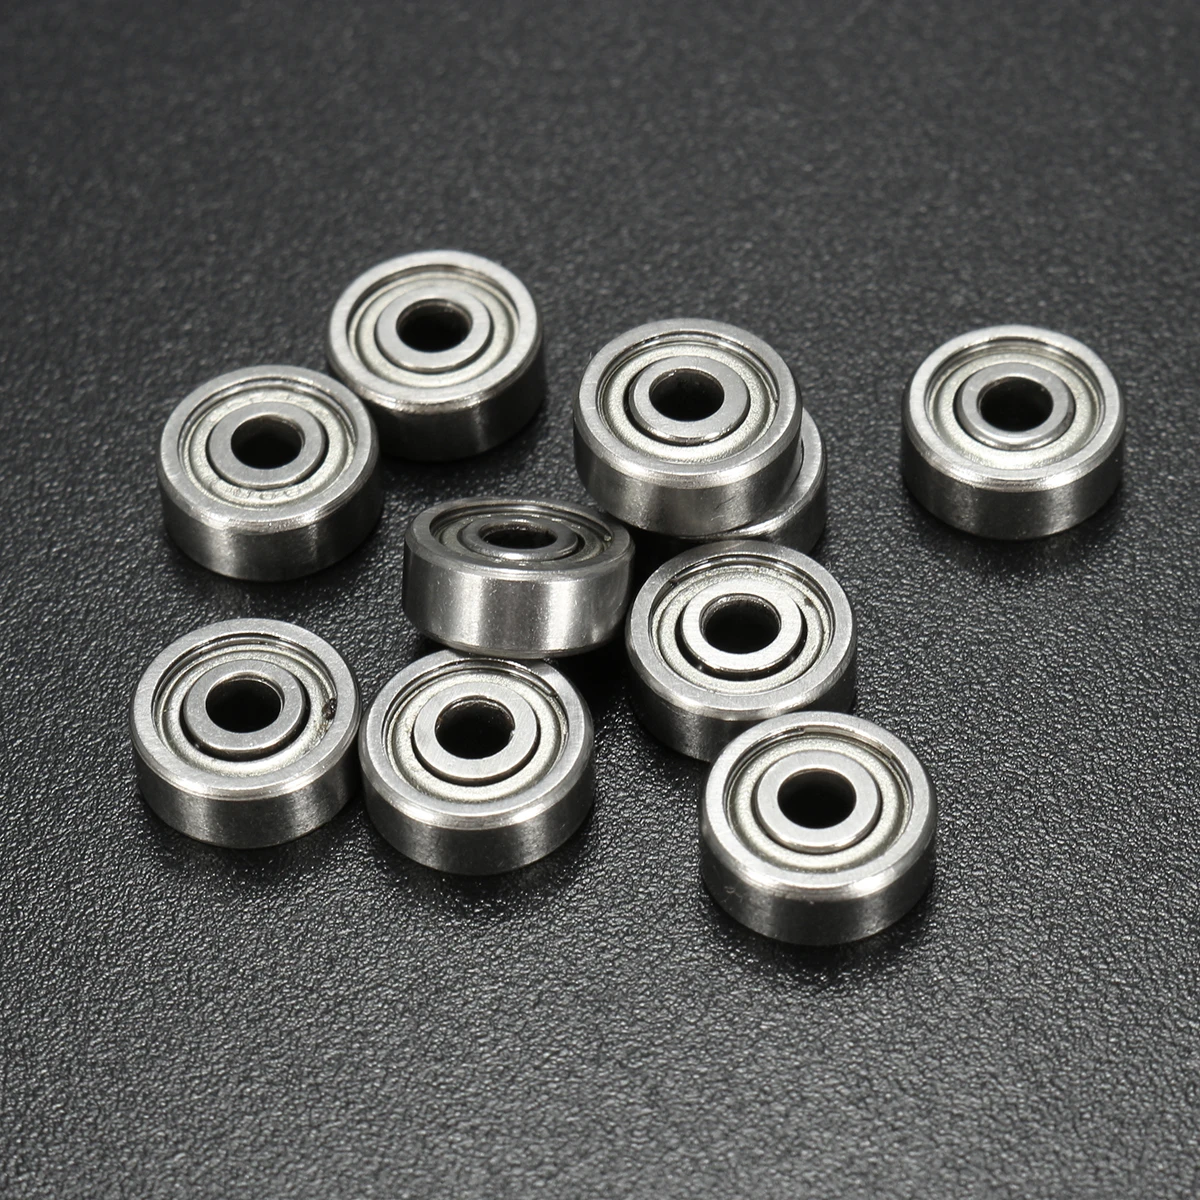 rubber seal bearings metal for metal bearings small hobby shafts for rod projects ball bearings 